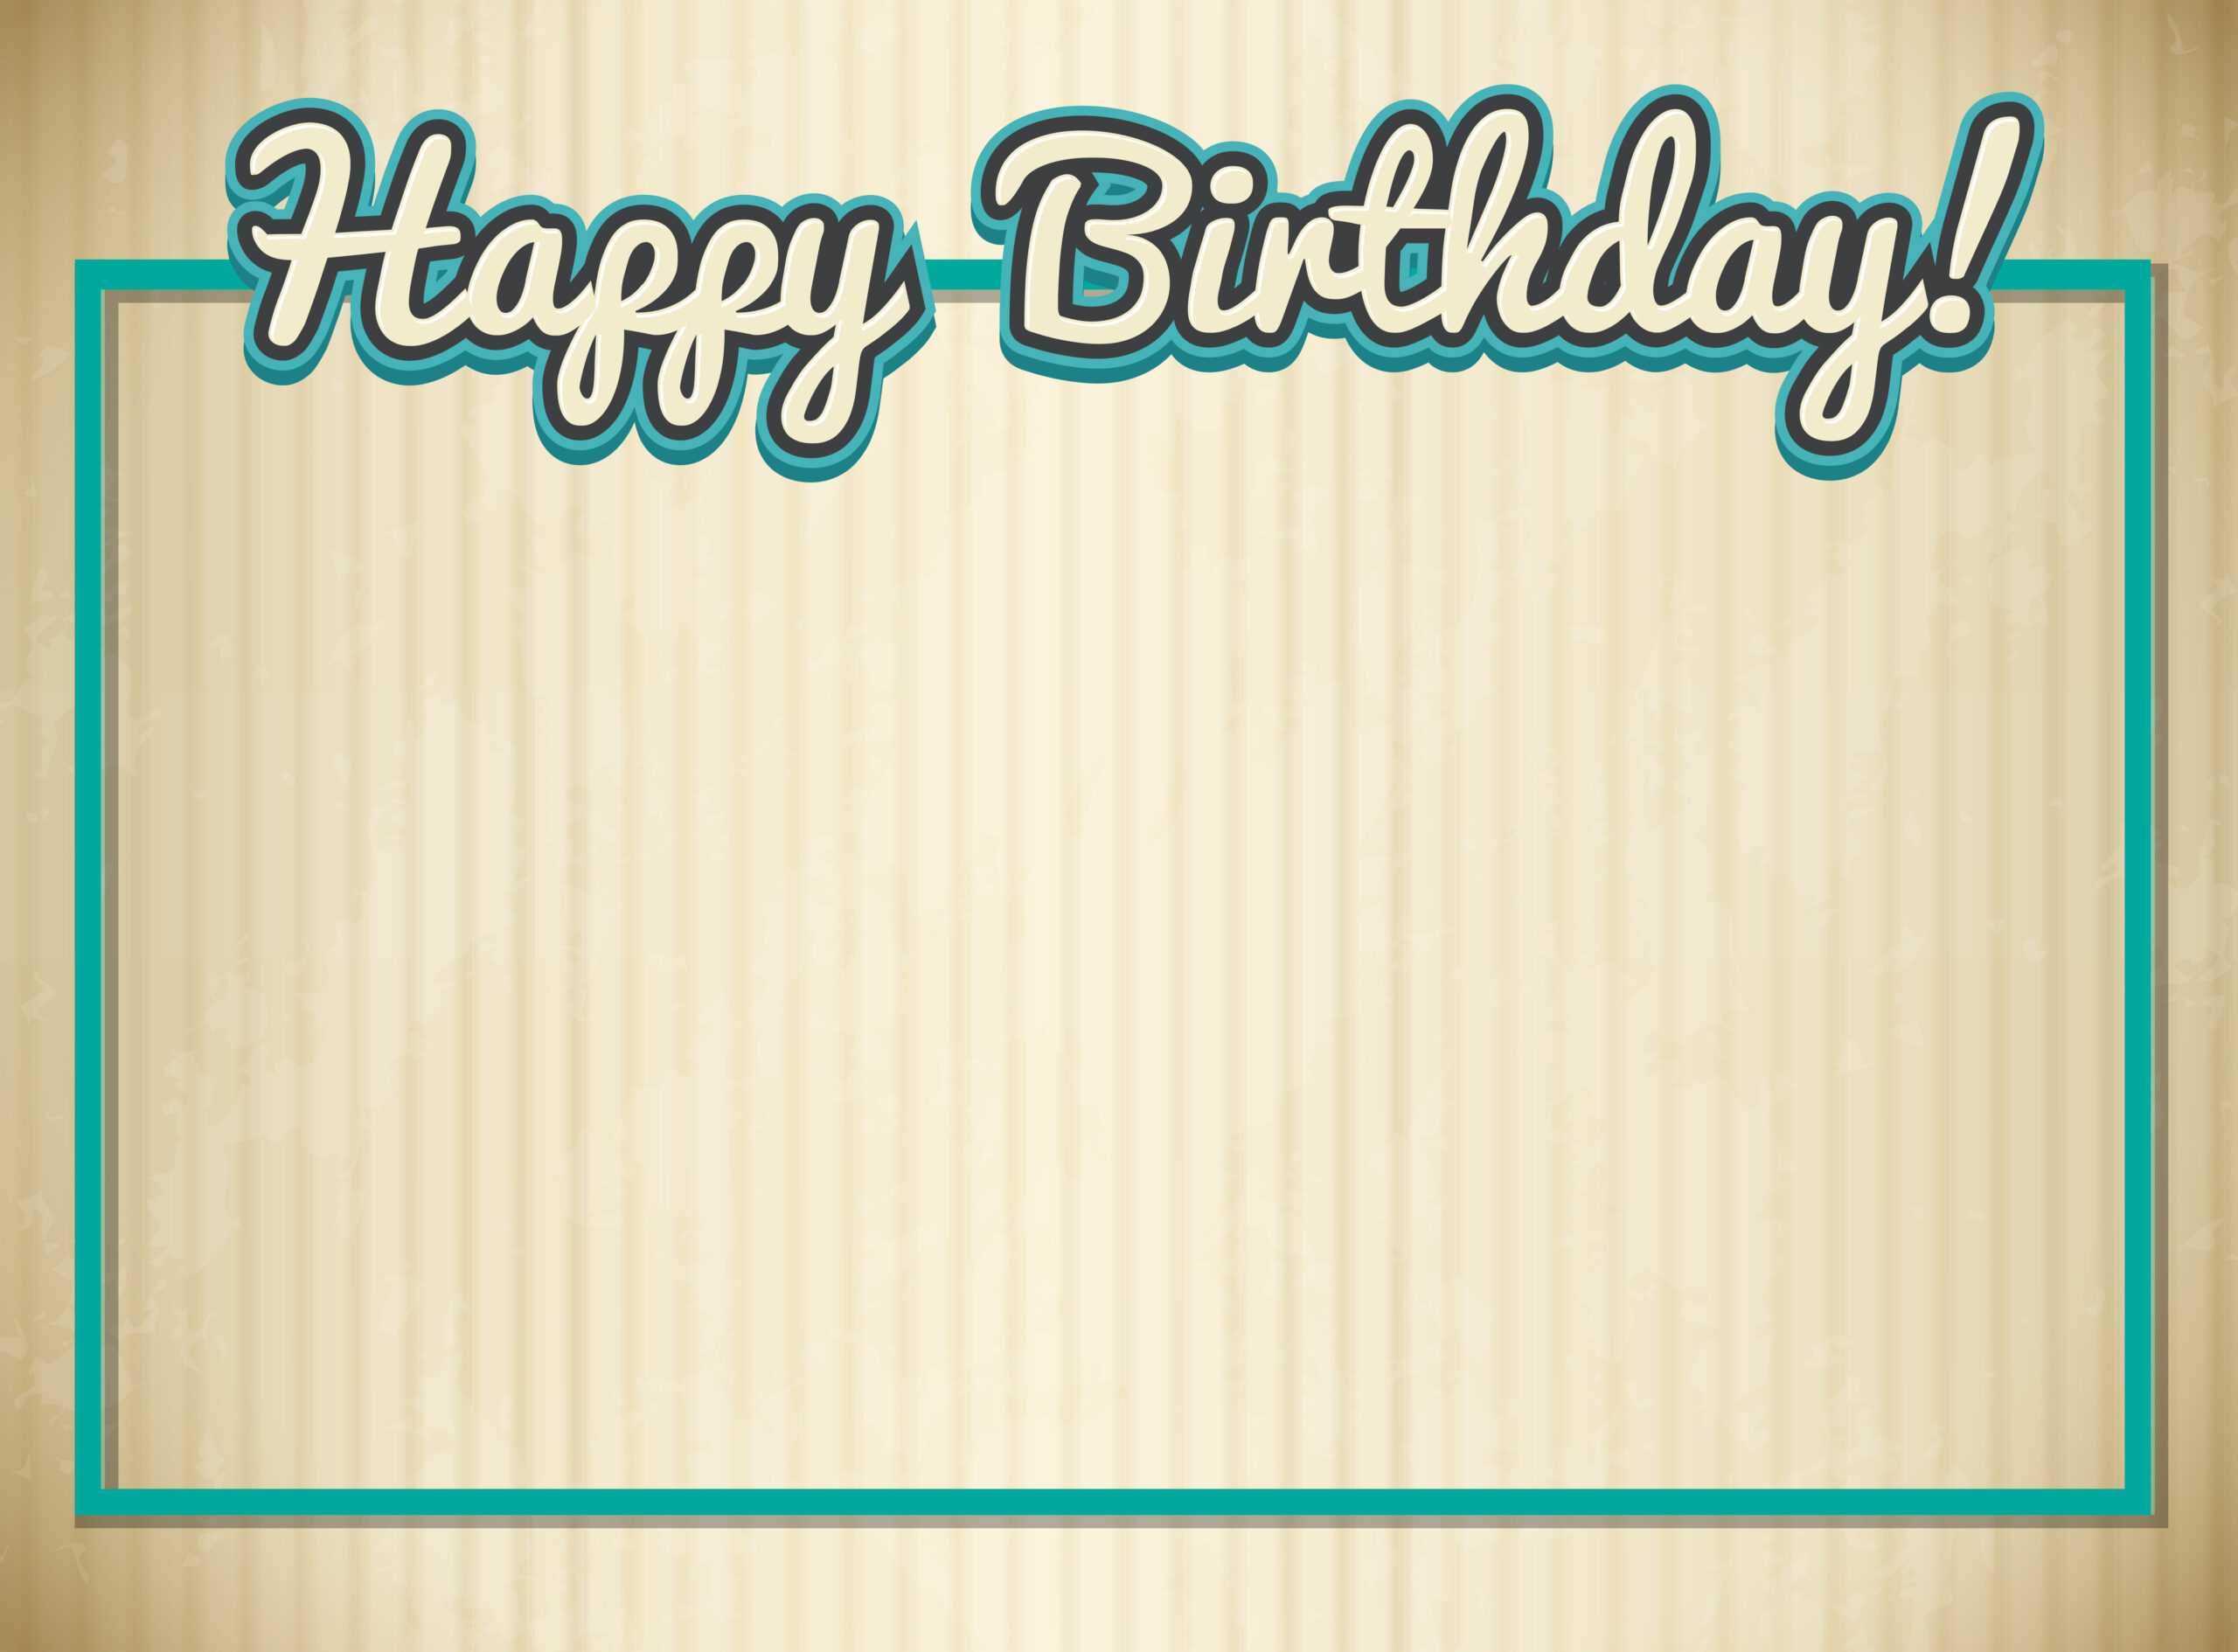 Blank Birthday Card Template – Download Free Vectors Intended For Blank Magic Card Template